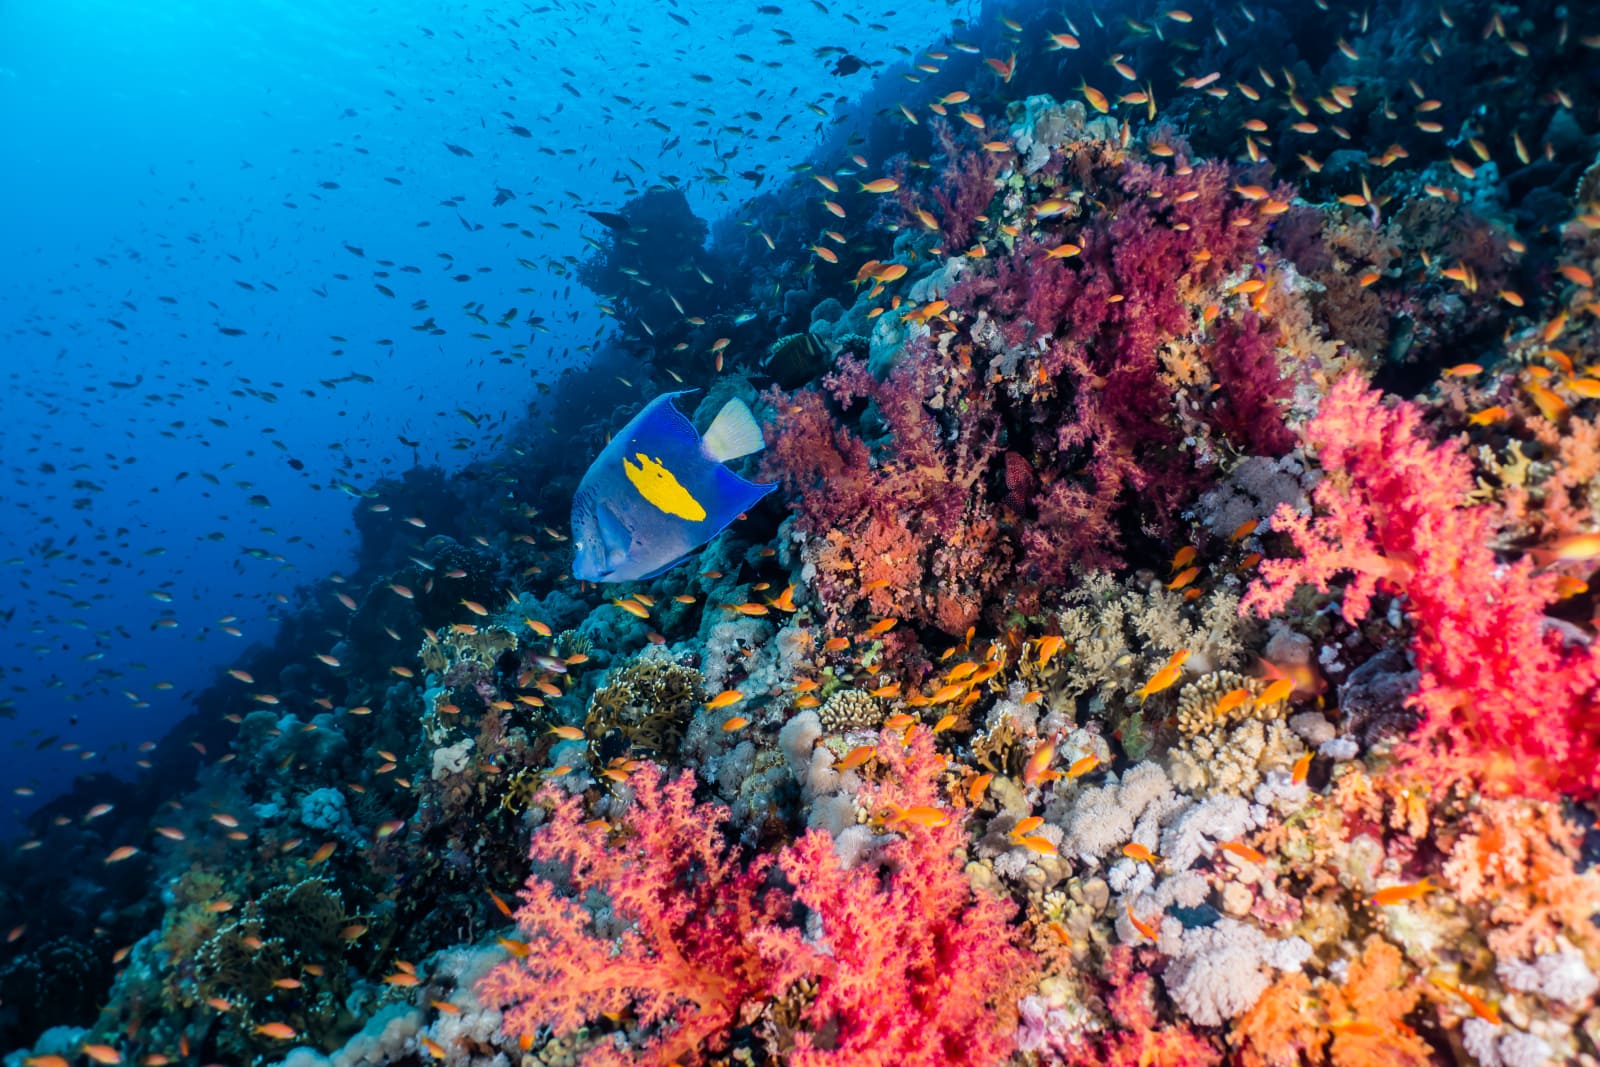 Red Sea coral holds a blueprint for global reef conservation